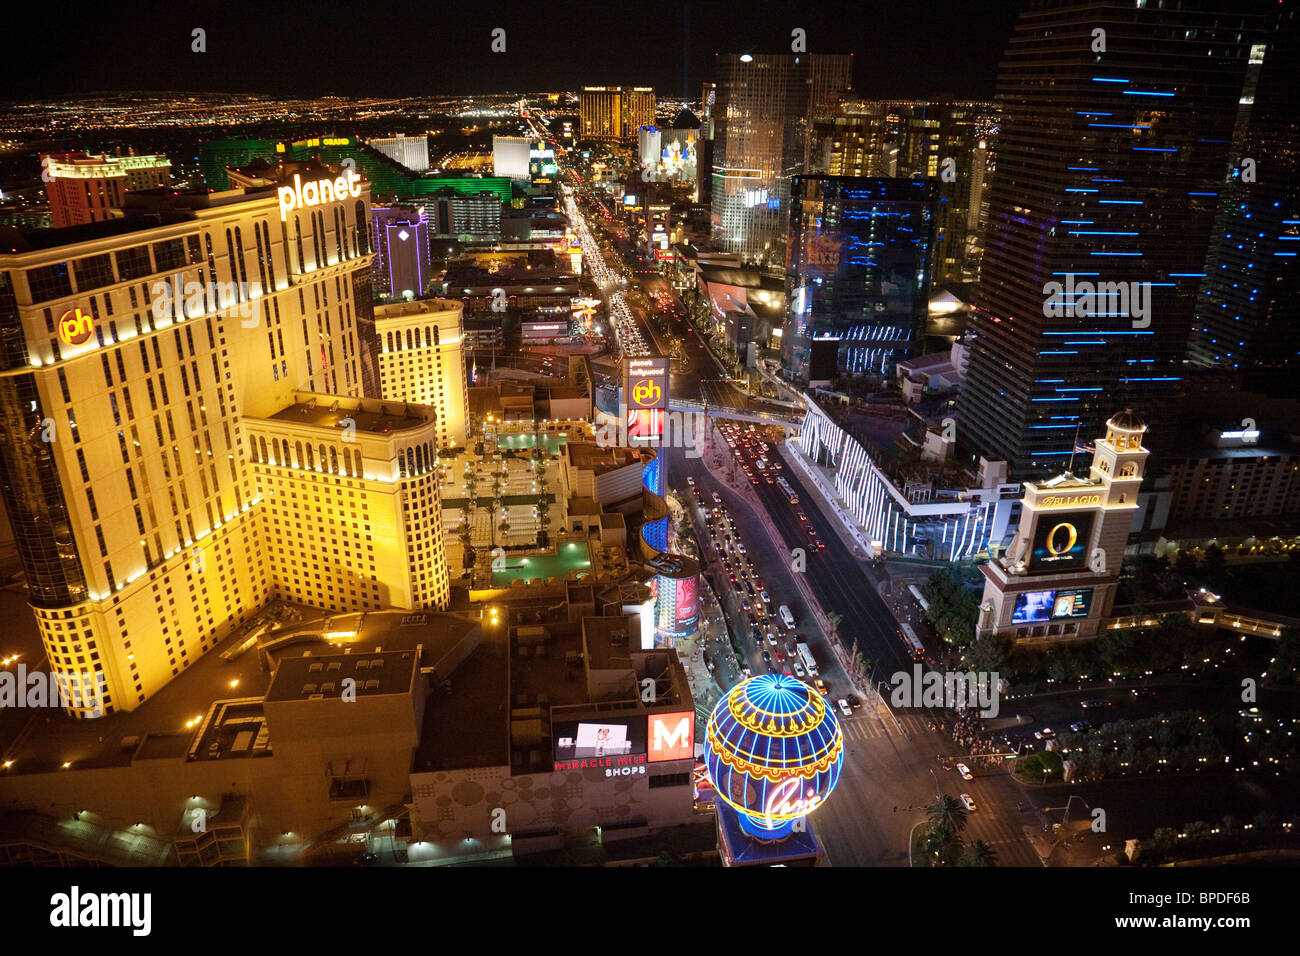 The strip, Las Vegas at night, looking South, seen from the top of